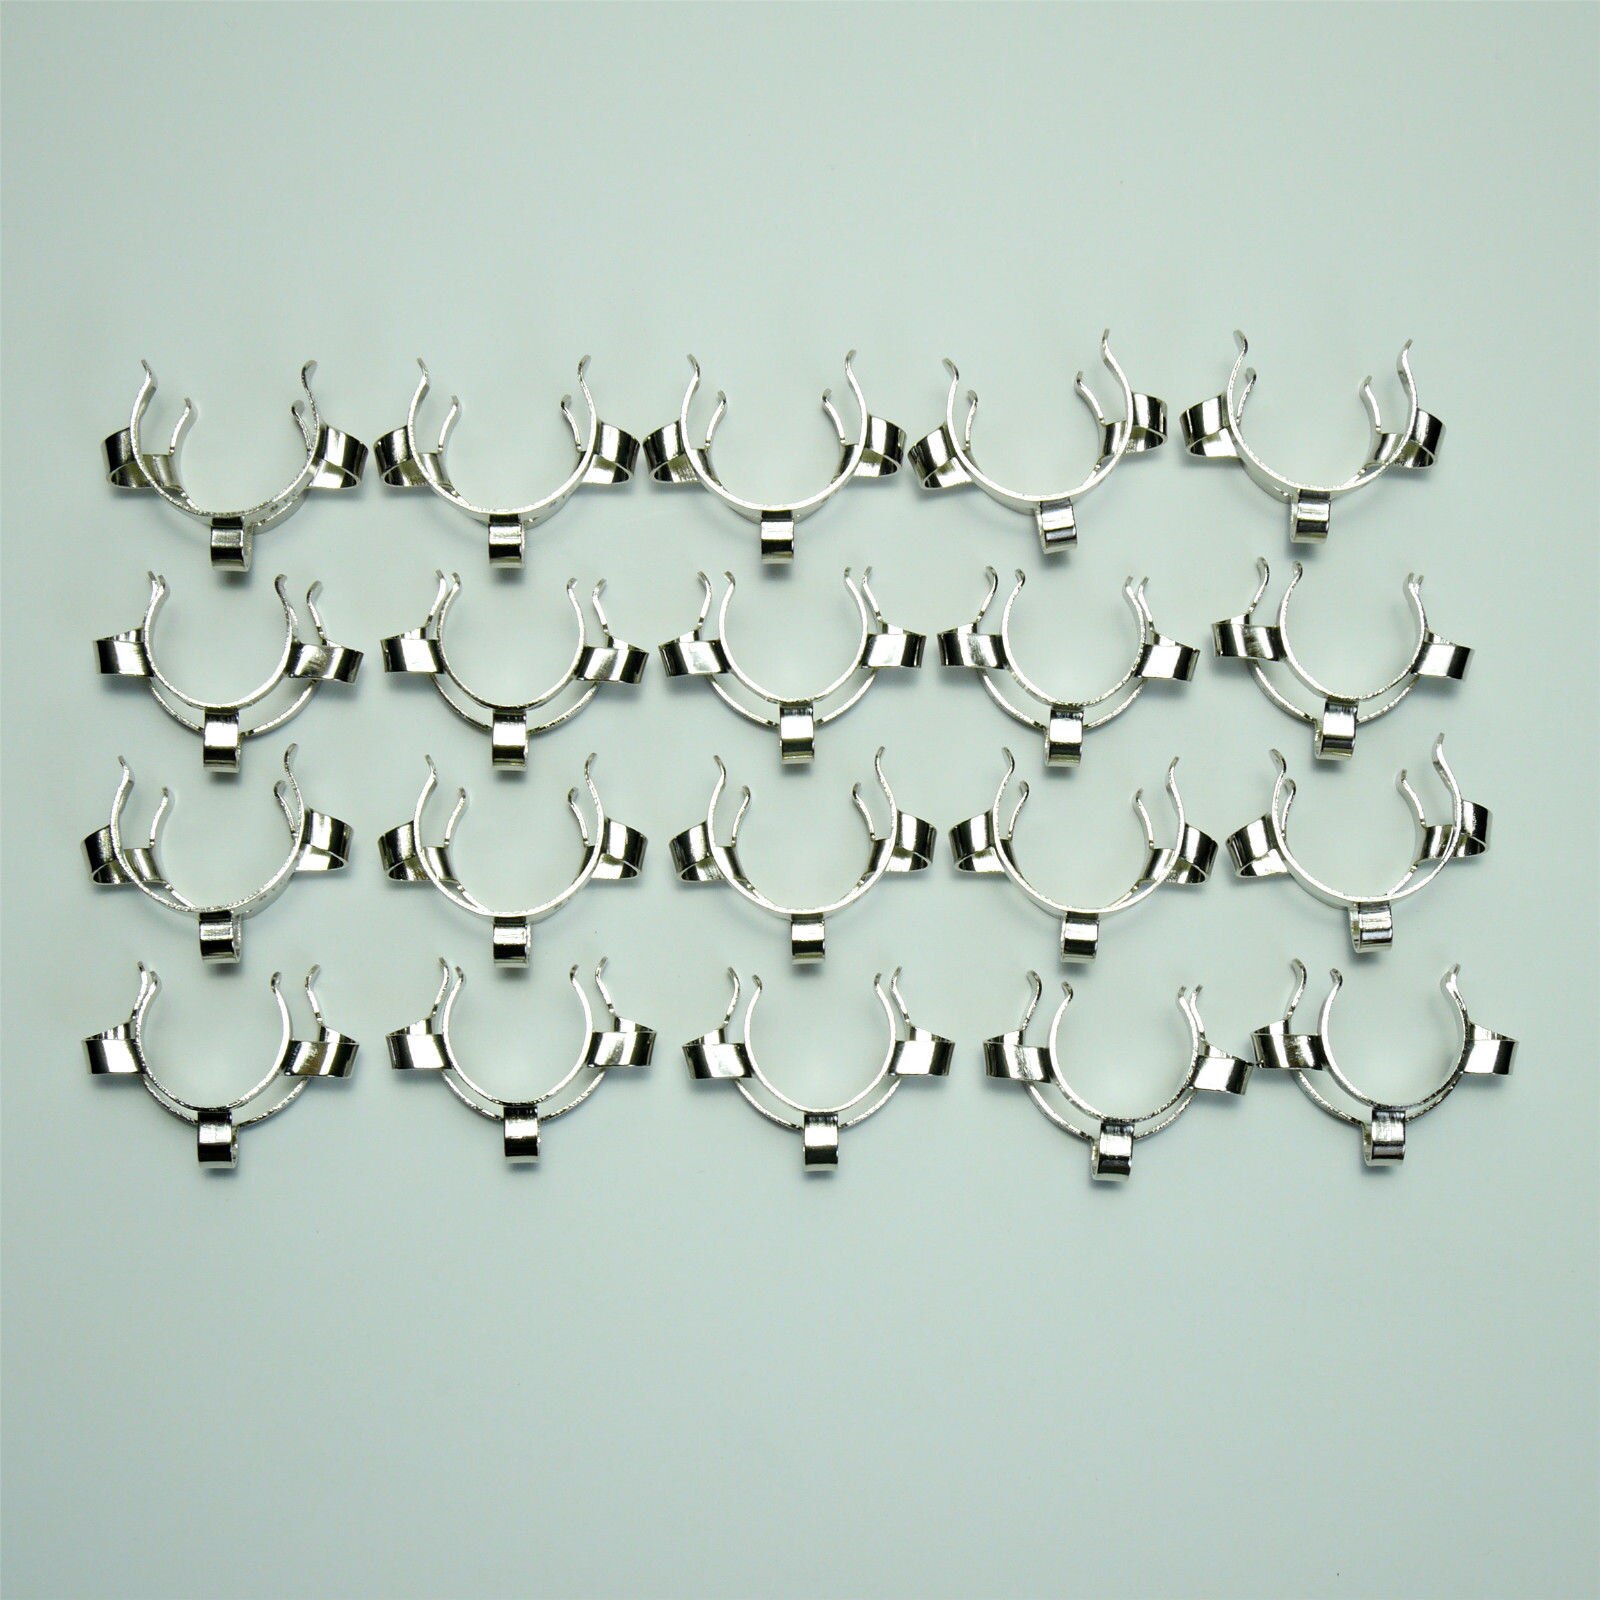 100 Pcs/Pack,29#,Metal Clip,Steel Keck Clamp,29/32 29/42 Glass Ground Joint